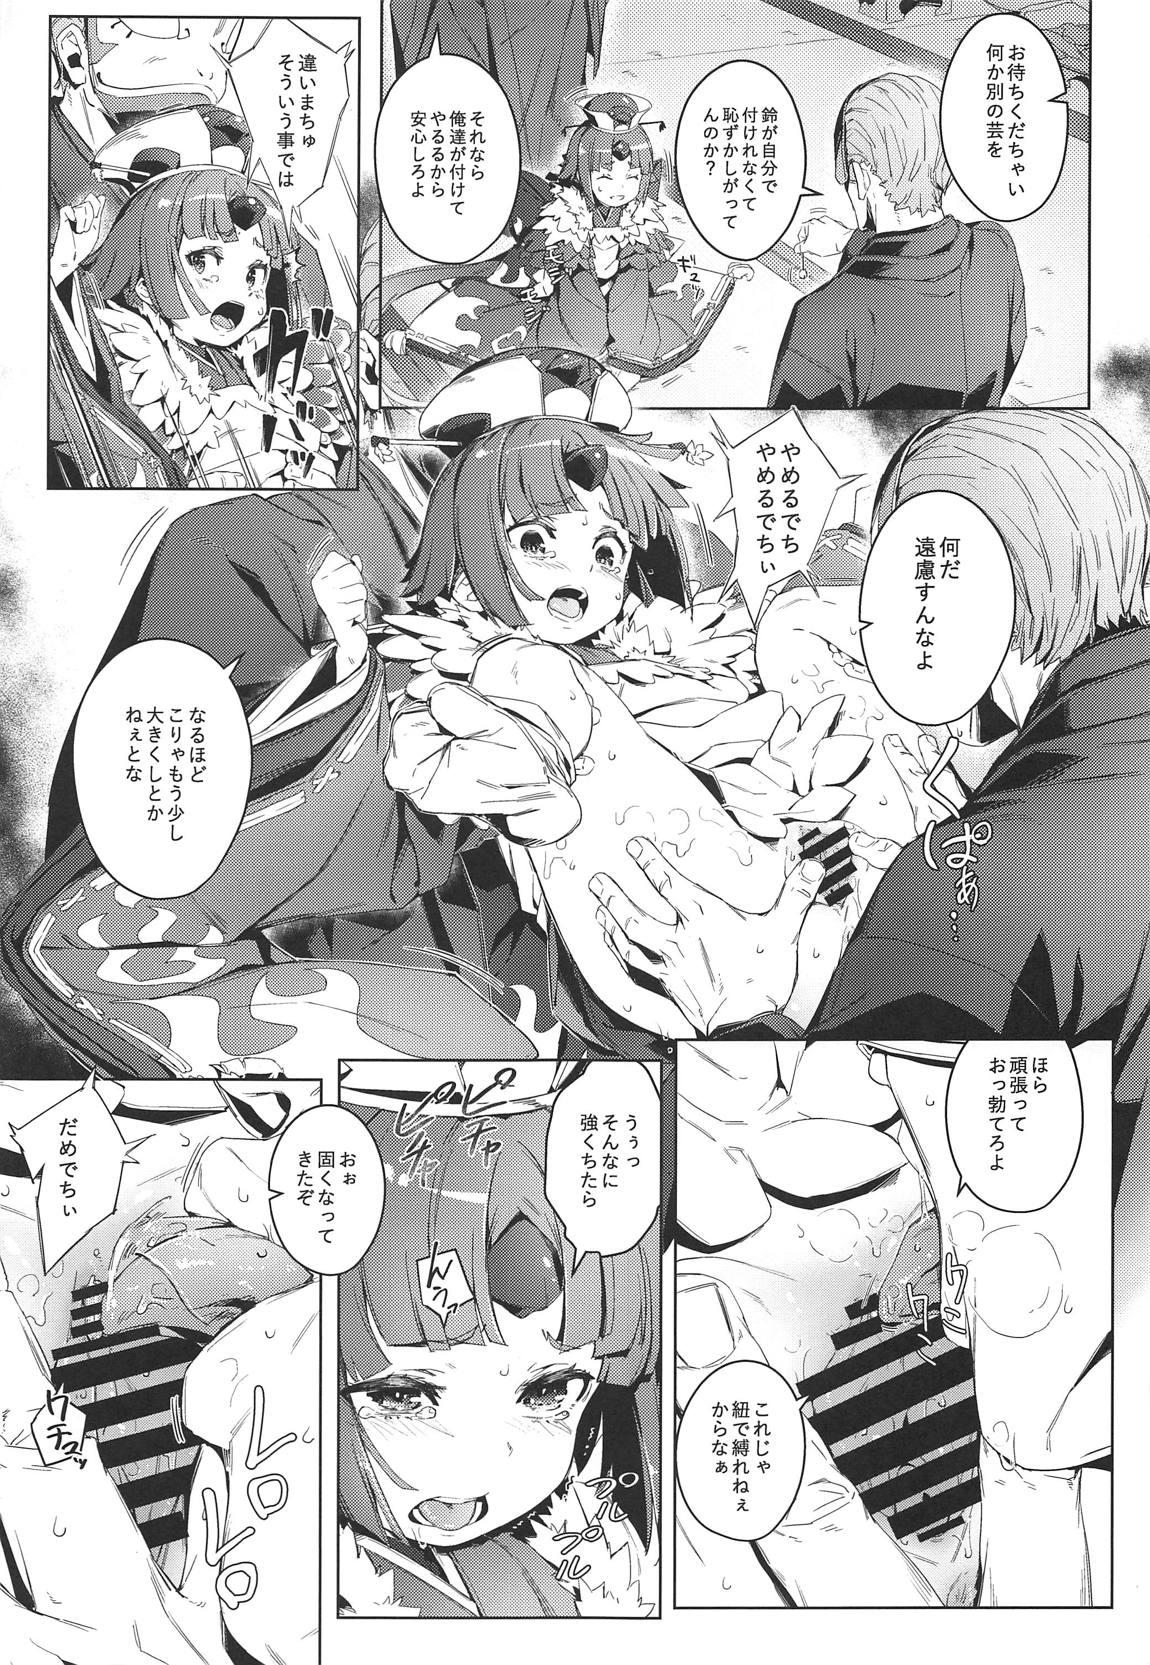 Blow Jobs Suzume no Namida - Fate grand order Farting - Page 8